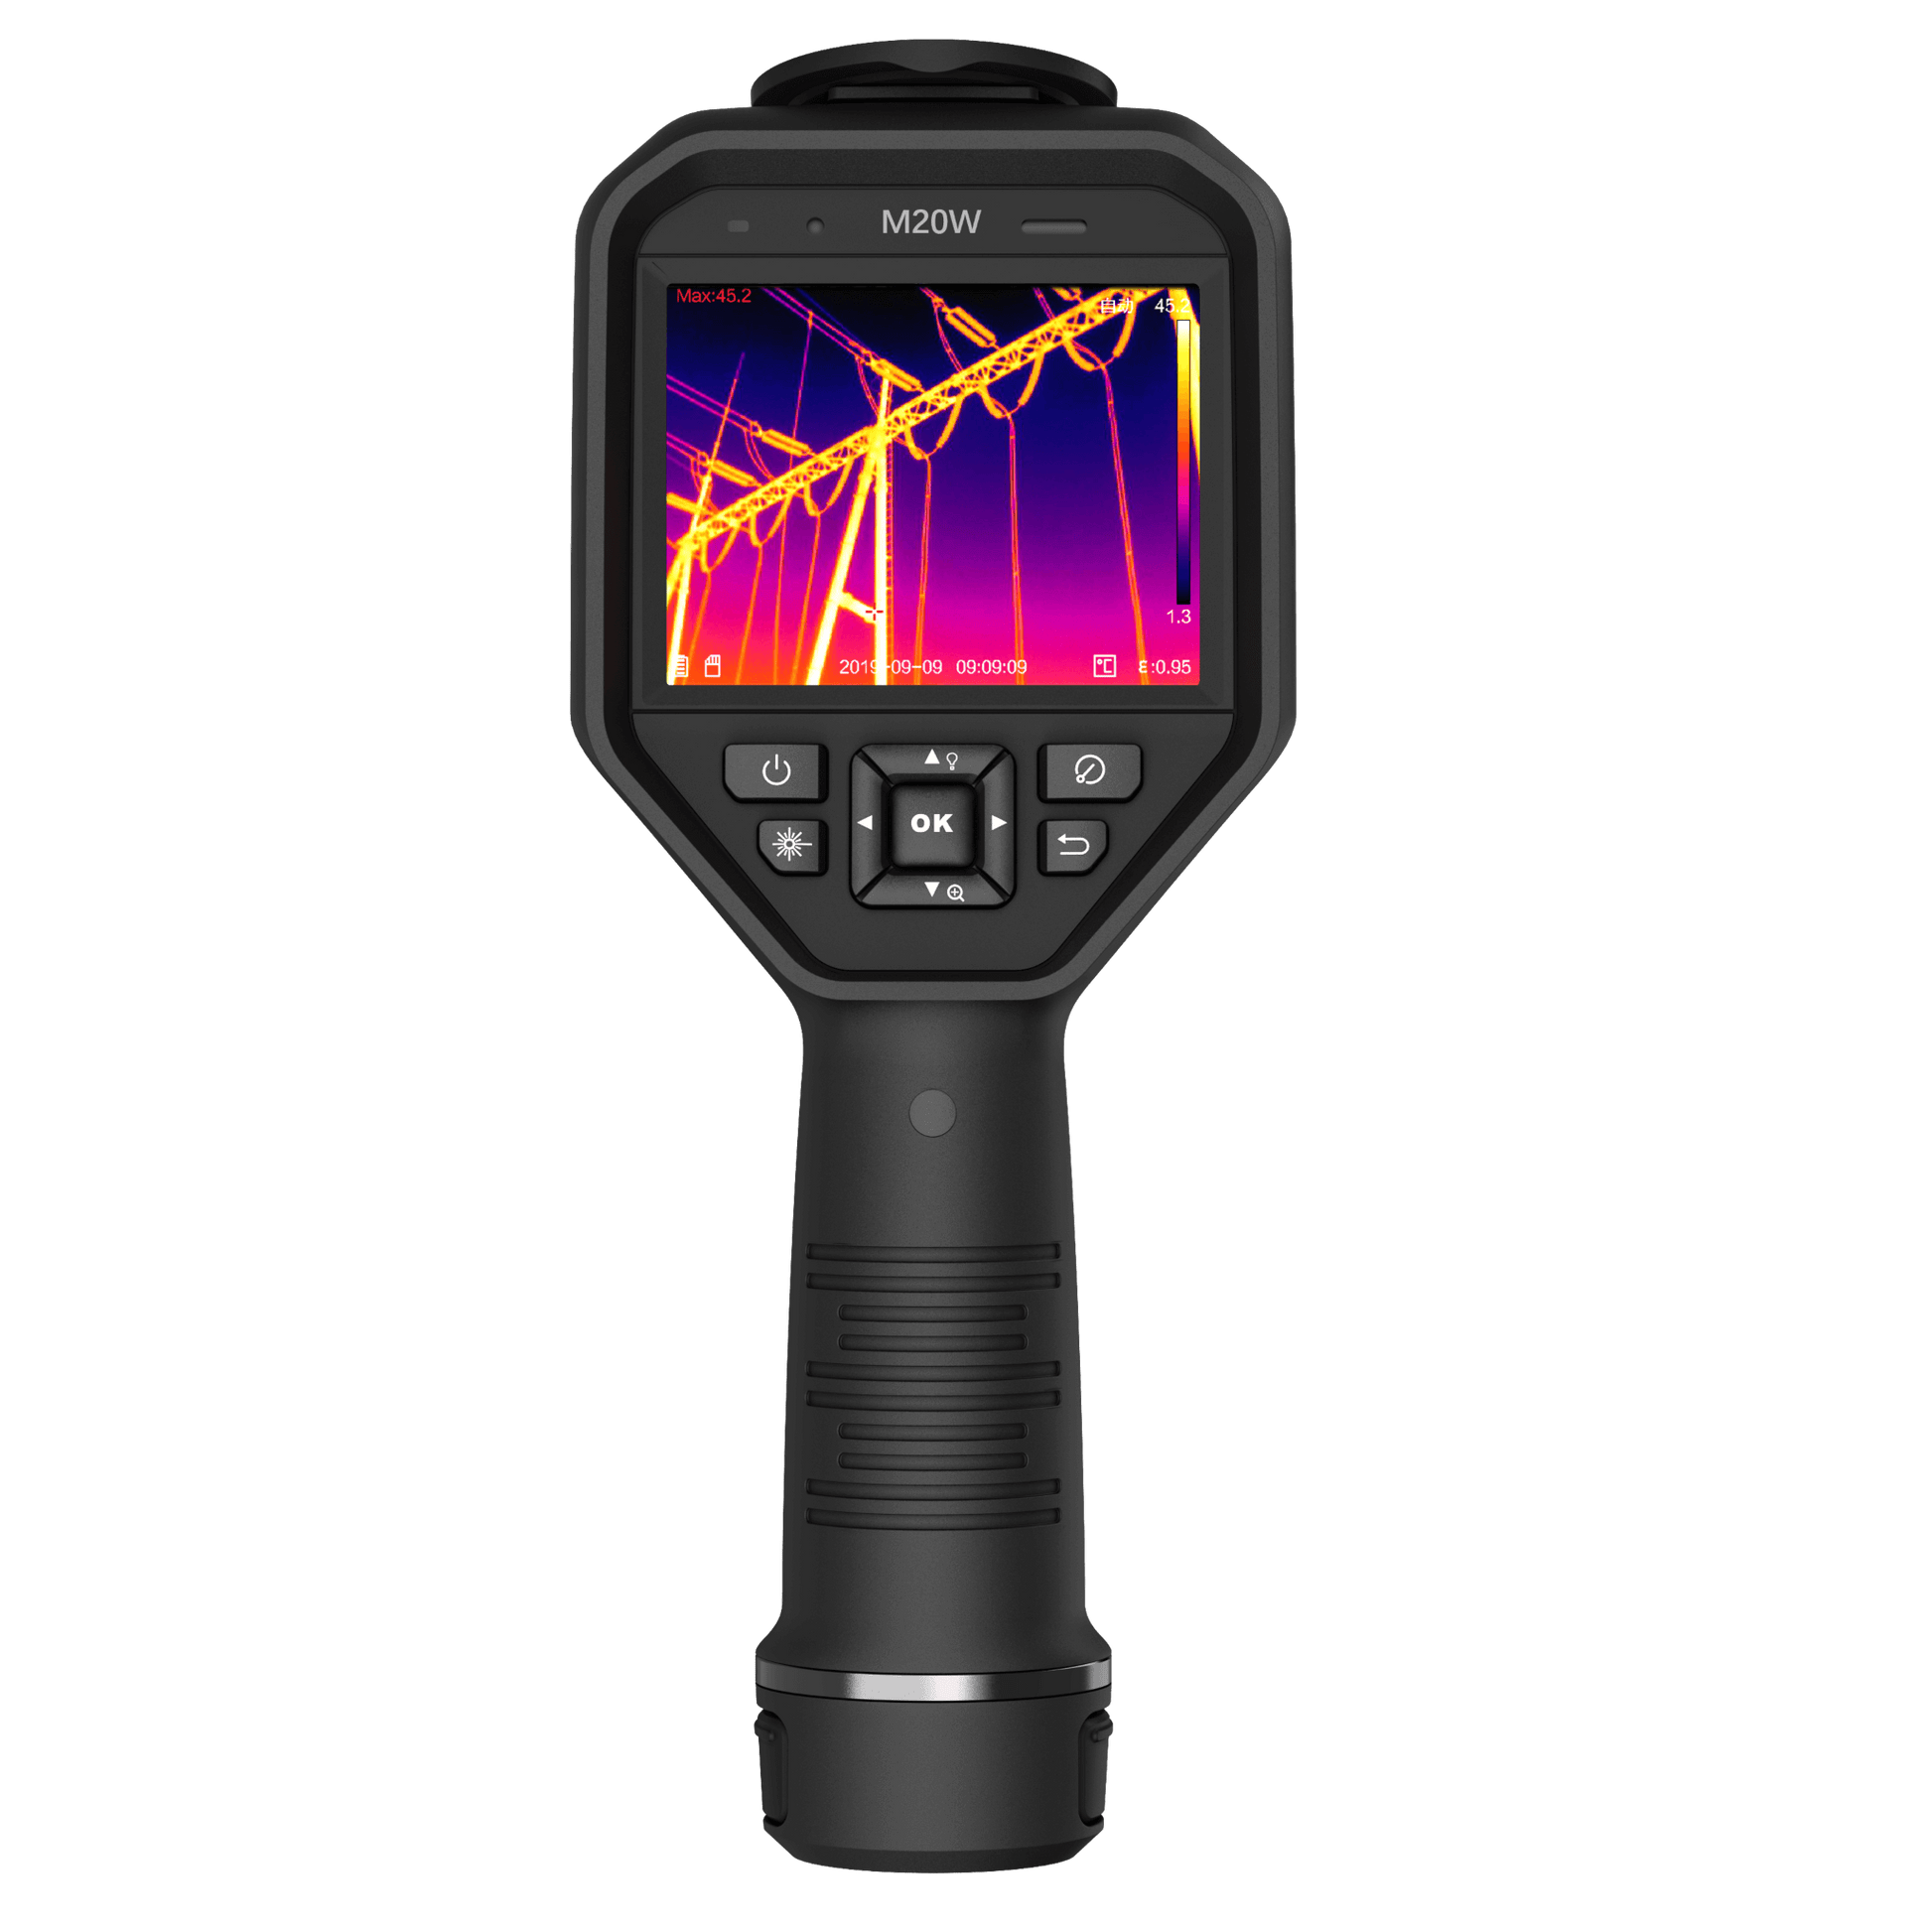 HikMicro M20W Handheld Thermography Camera on a transparent background - Screen View